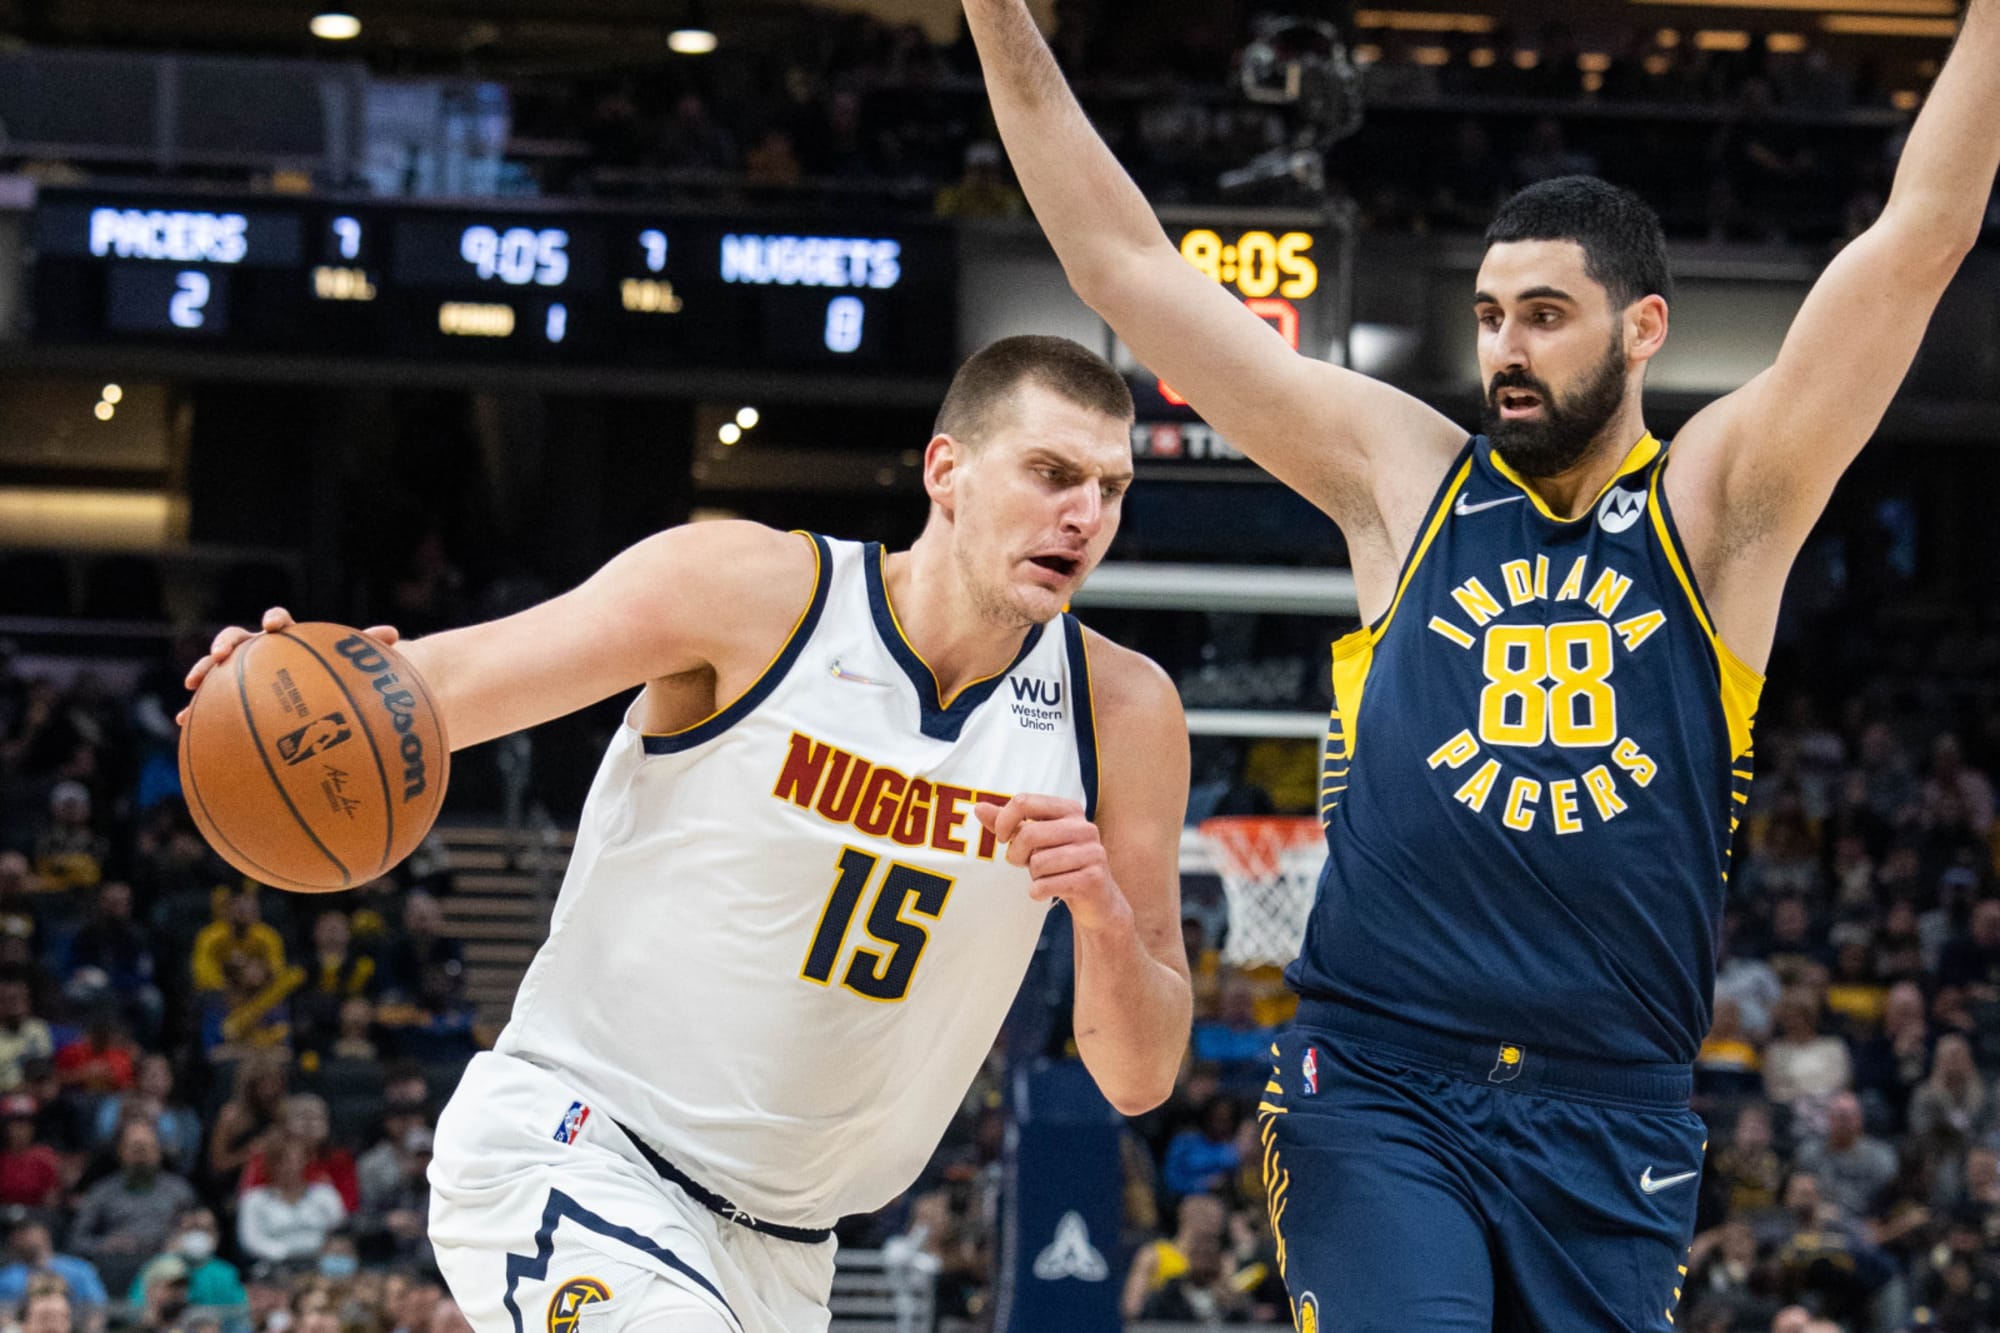 Insider: Pacers' defense falters in loss to Nuggets